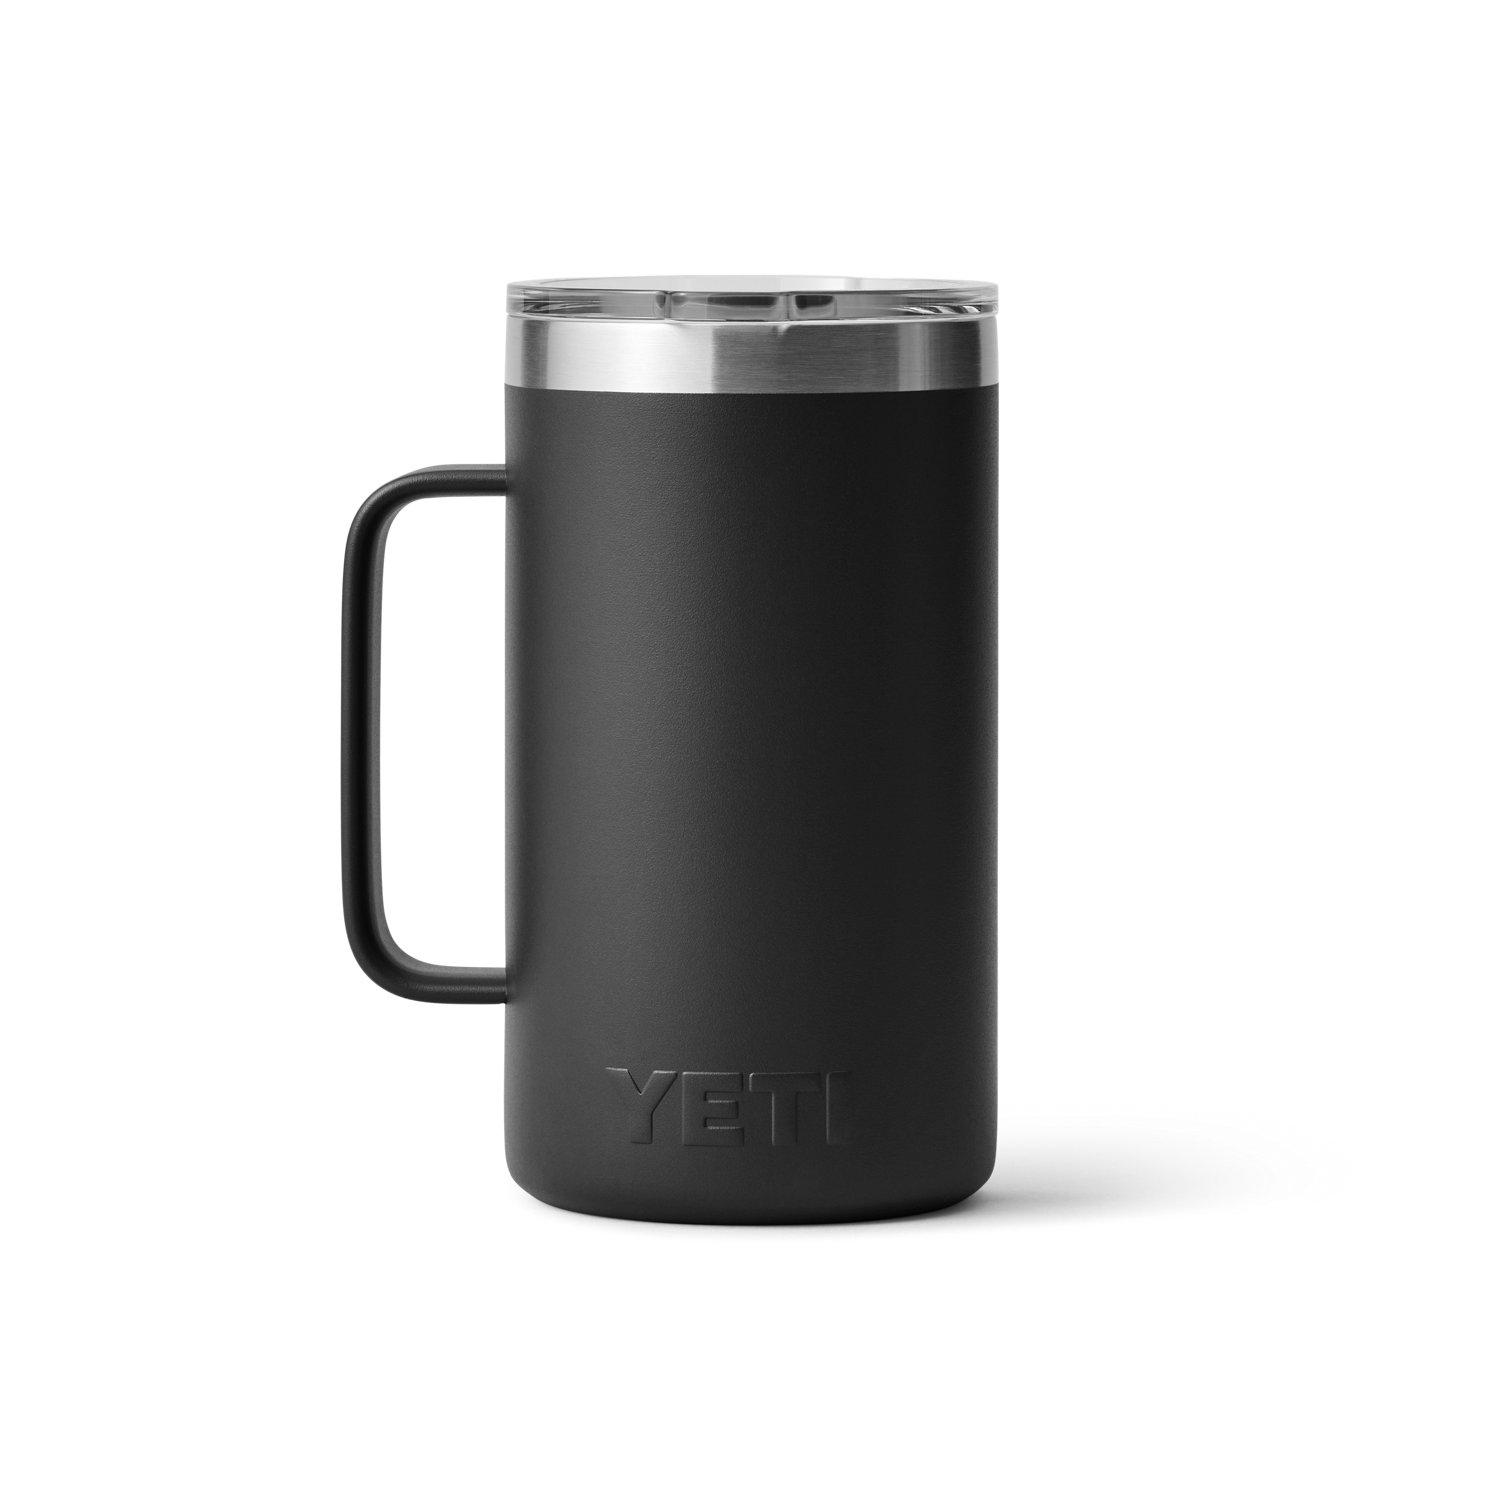 https://academy.scene7.com/is/image/academy//drinkware/yeti-rambler-24oz-mug-with-magslider-21071500613-black/9265c29d0b804df895fbbc63dfcf54d4?$pdp-mobile-gallery-ng$